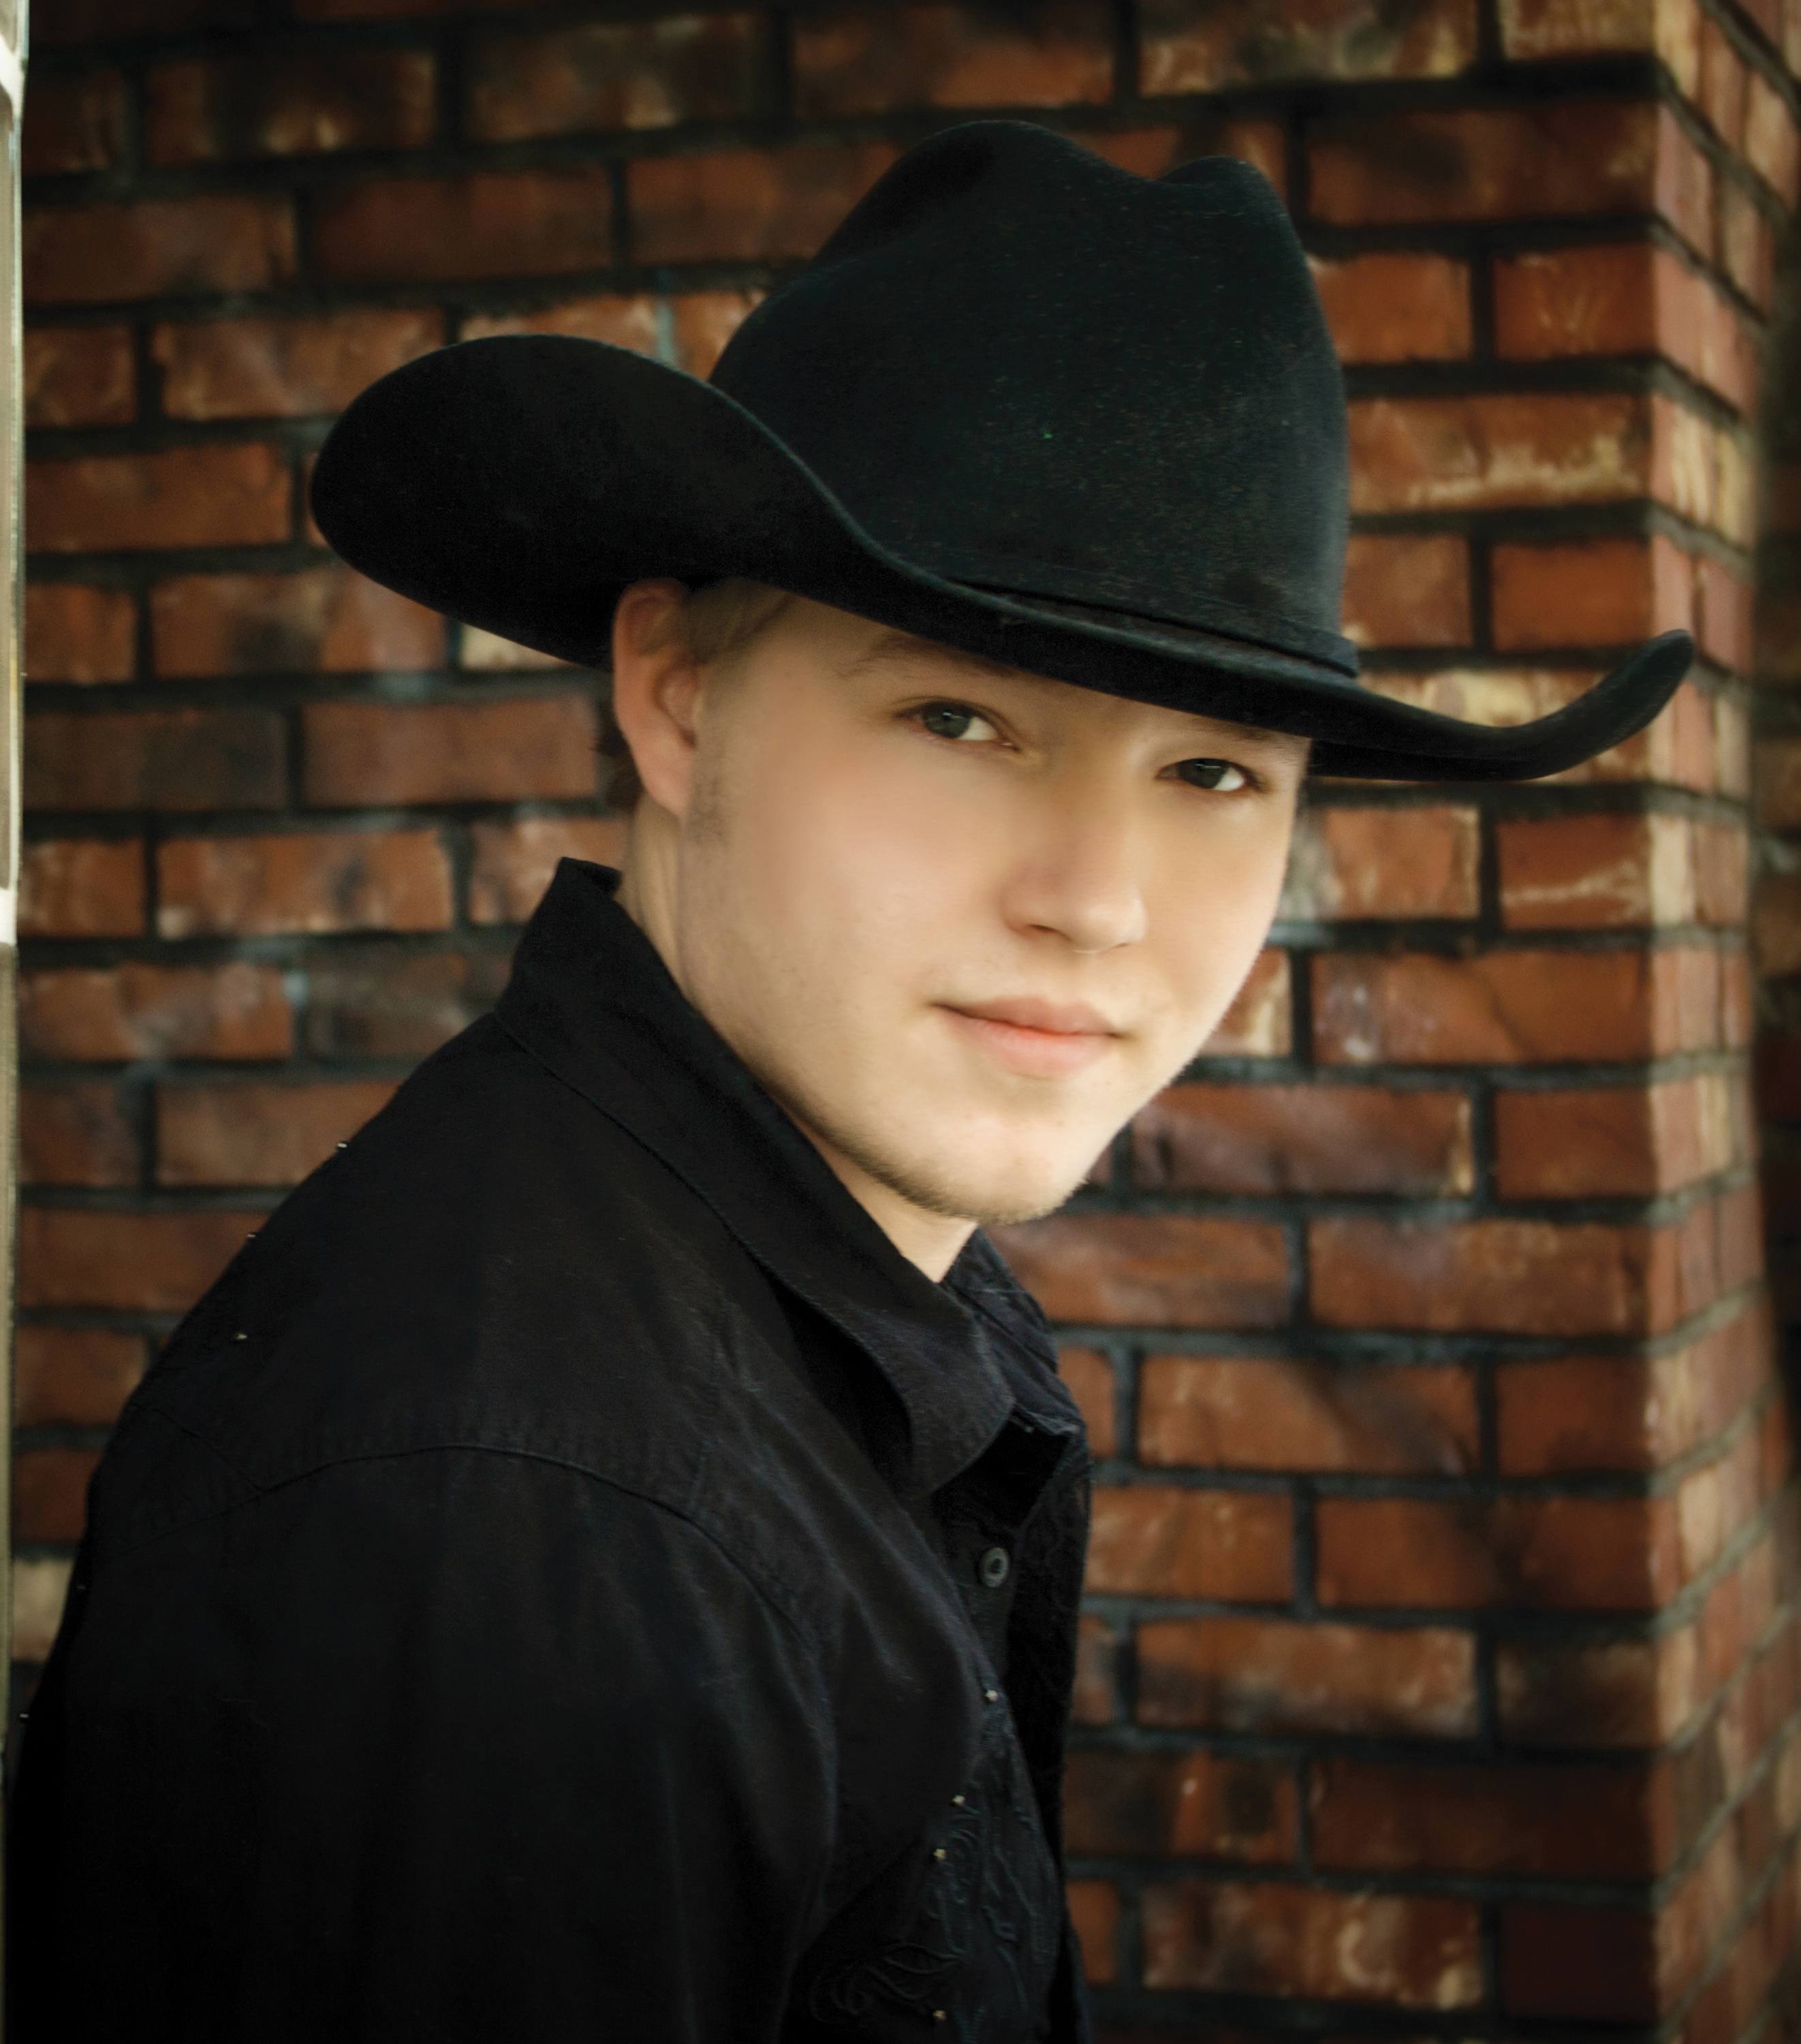 LENDING TALENT- Singer Jaydee Bixby will be performing at a fundraiser for the MS Society on Jan. 21 in Lacombe.